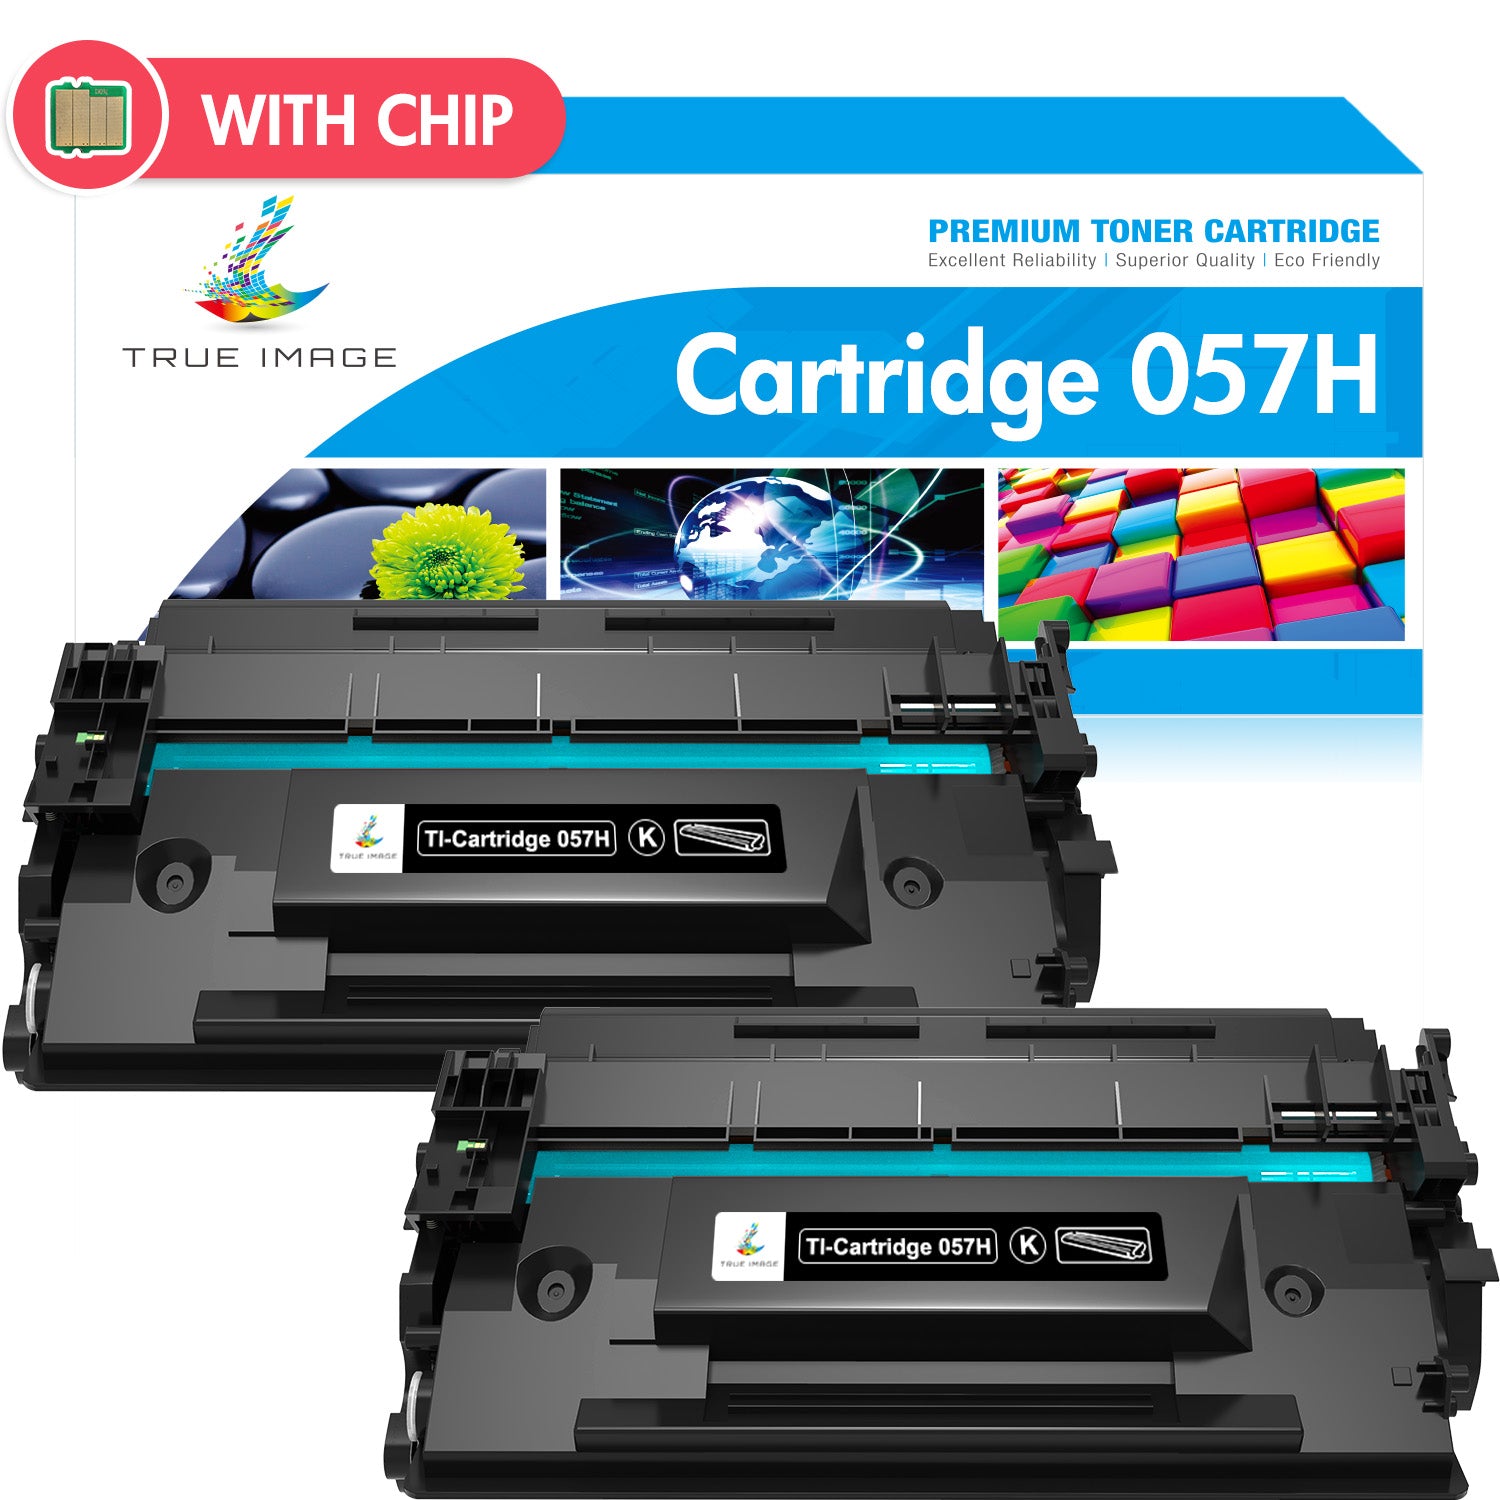 Canon MF445dw Toner Replacement